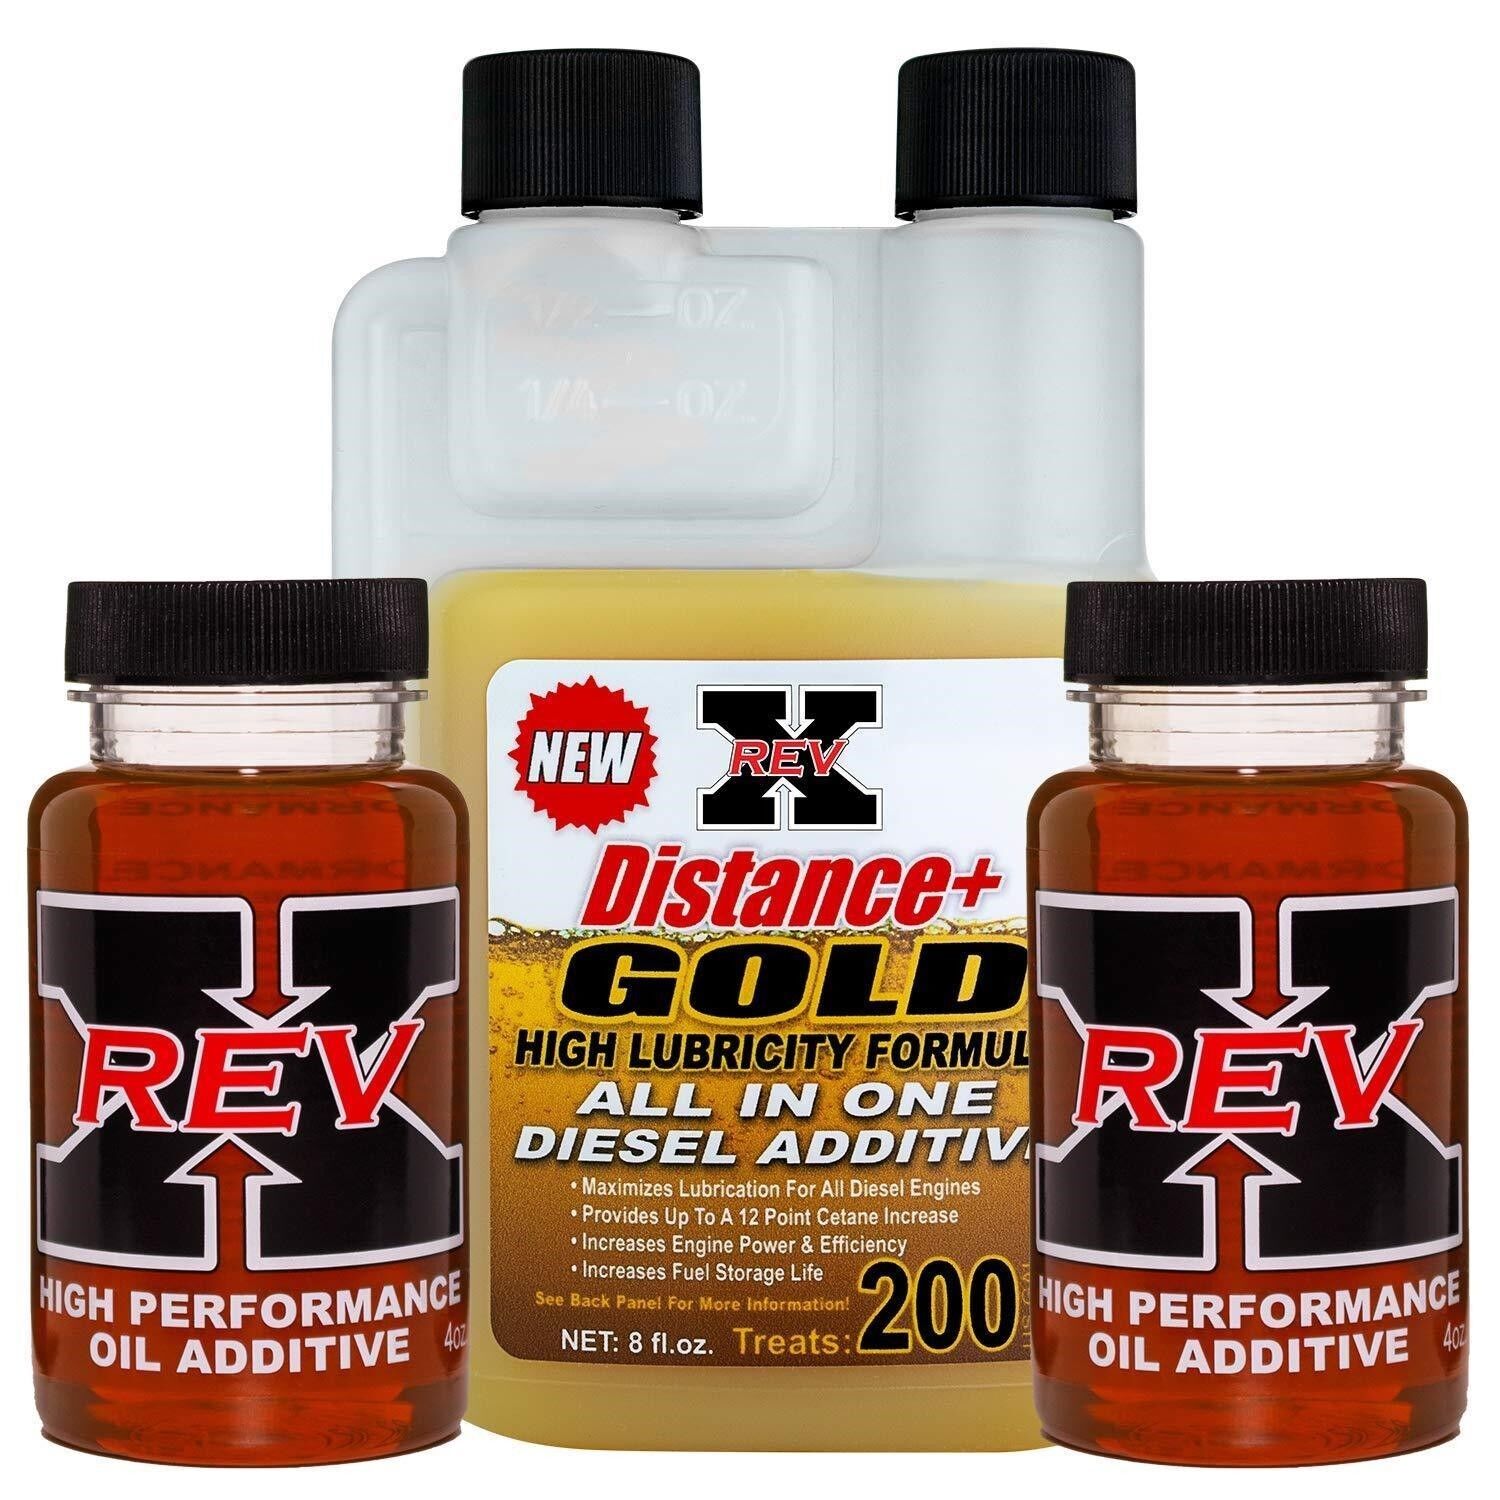 REV-X High Lubricity Diesel Kit - Fixes Cold Start Issues & Cleans Injectors